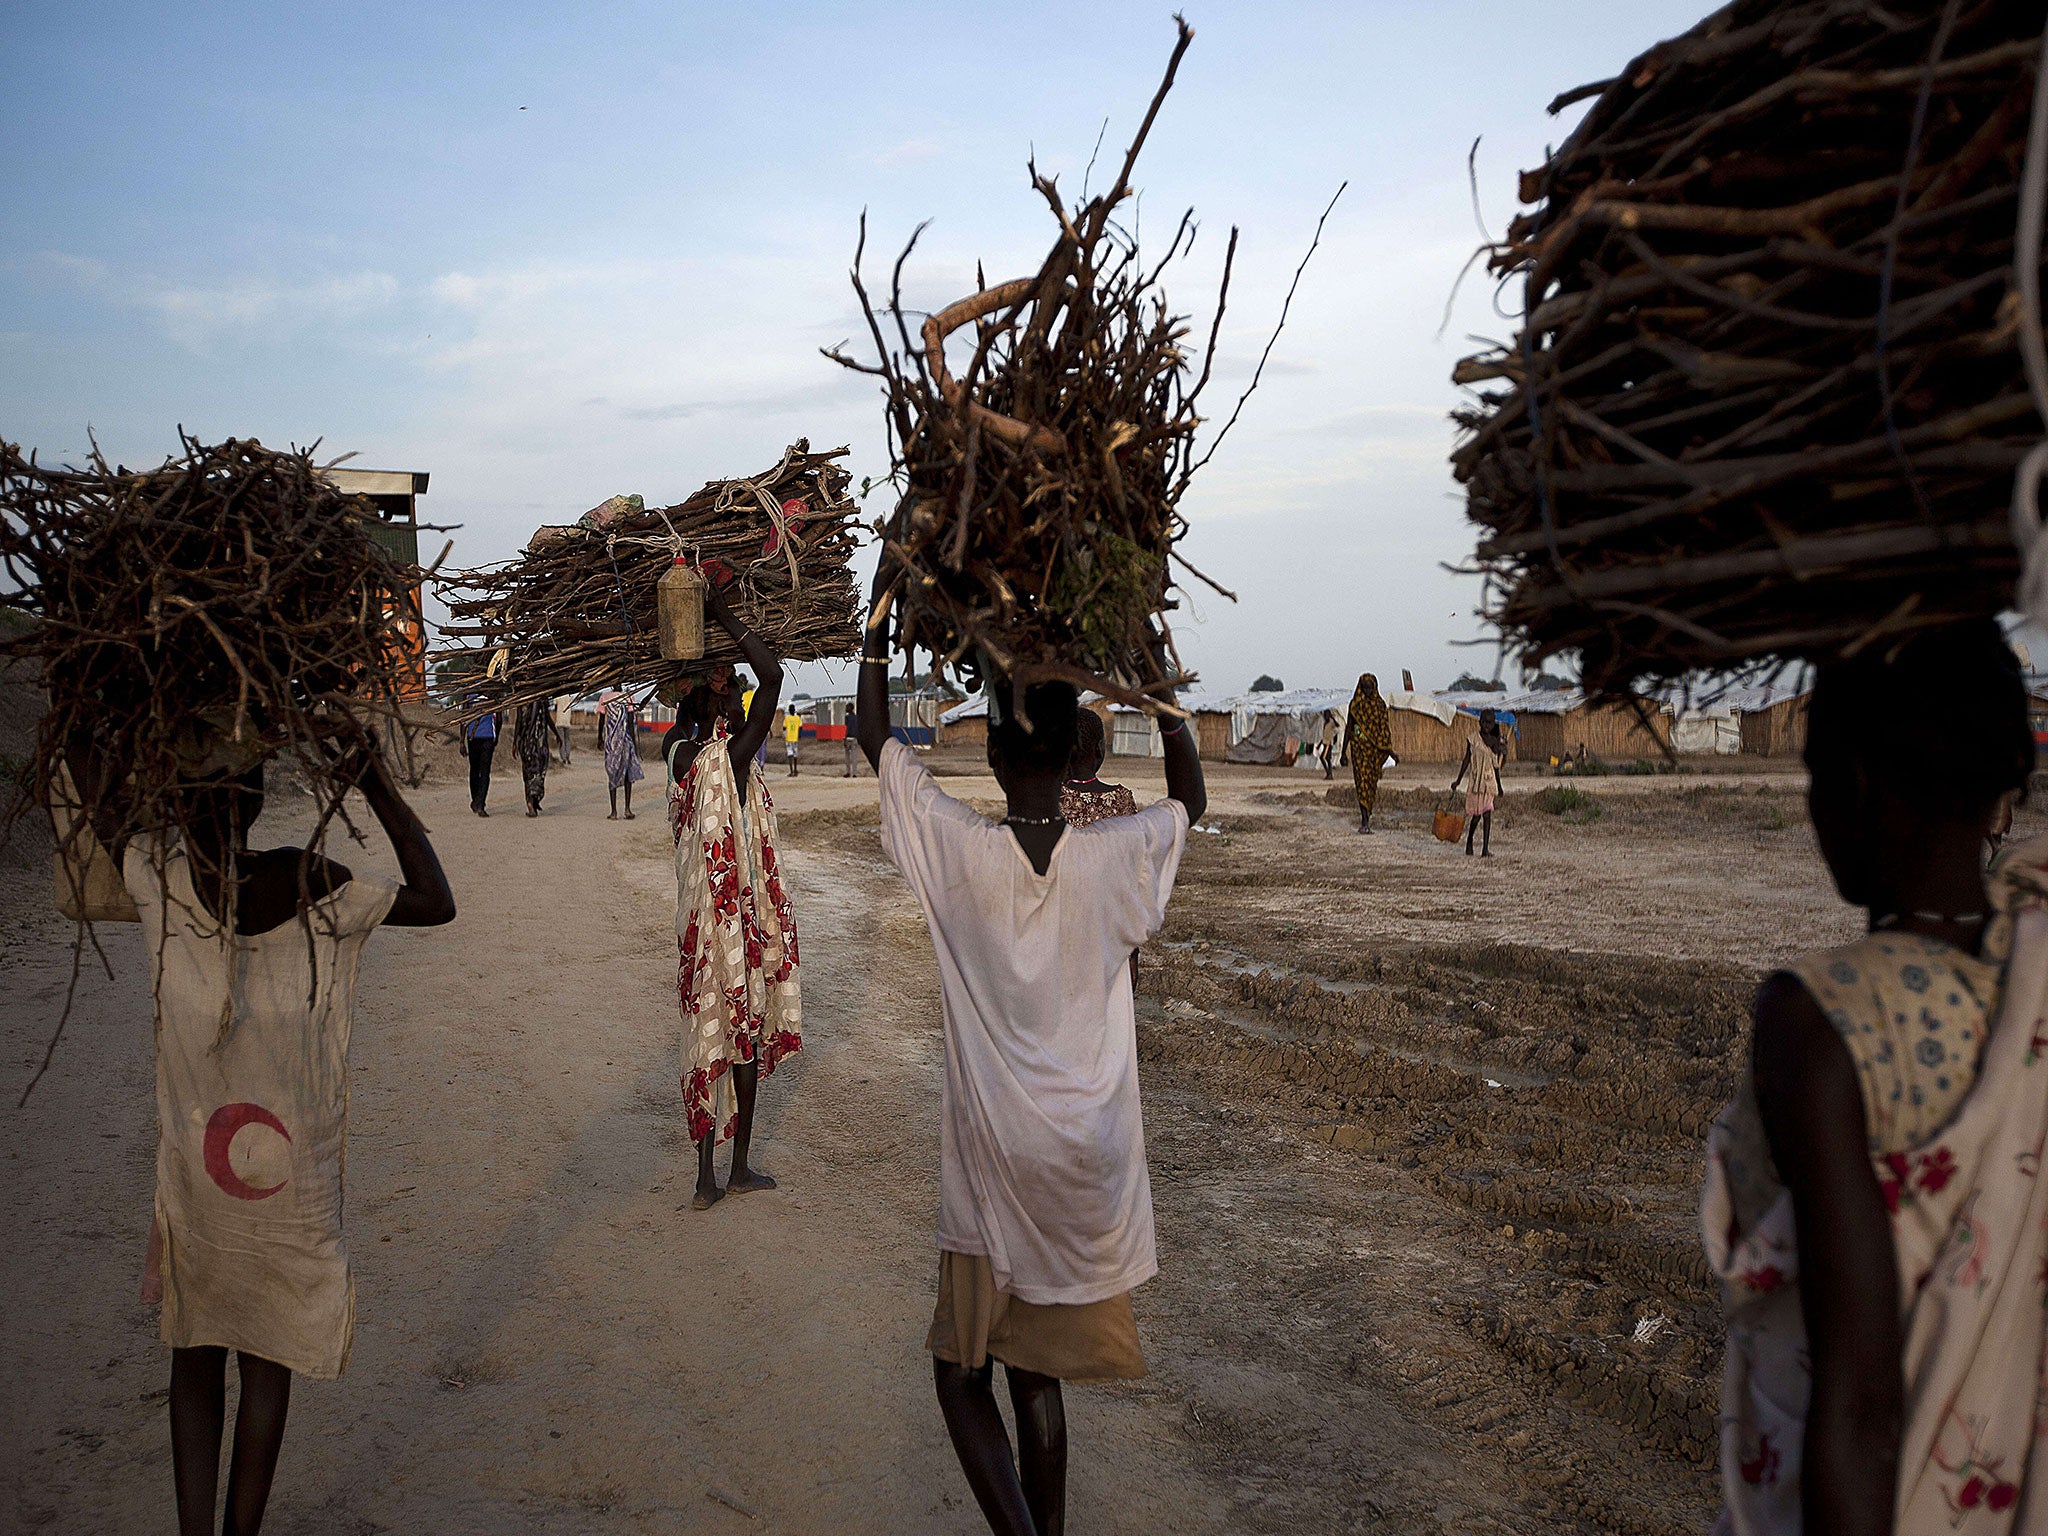 Refugees gather firewood at the UN base at Bentiu. Women carrying out the task risk ambush, rape and abduction by armed men in the surrounding forests